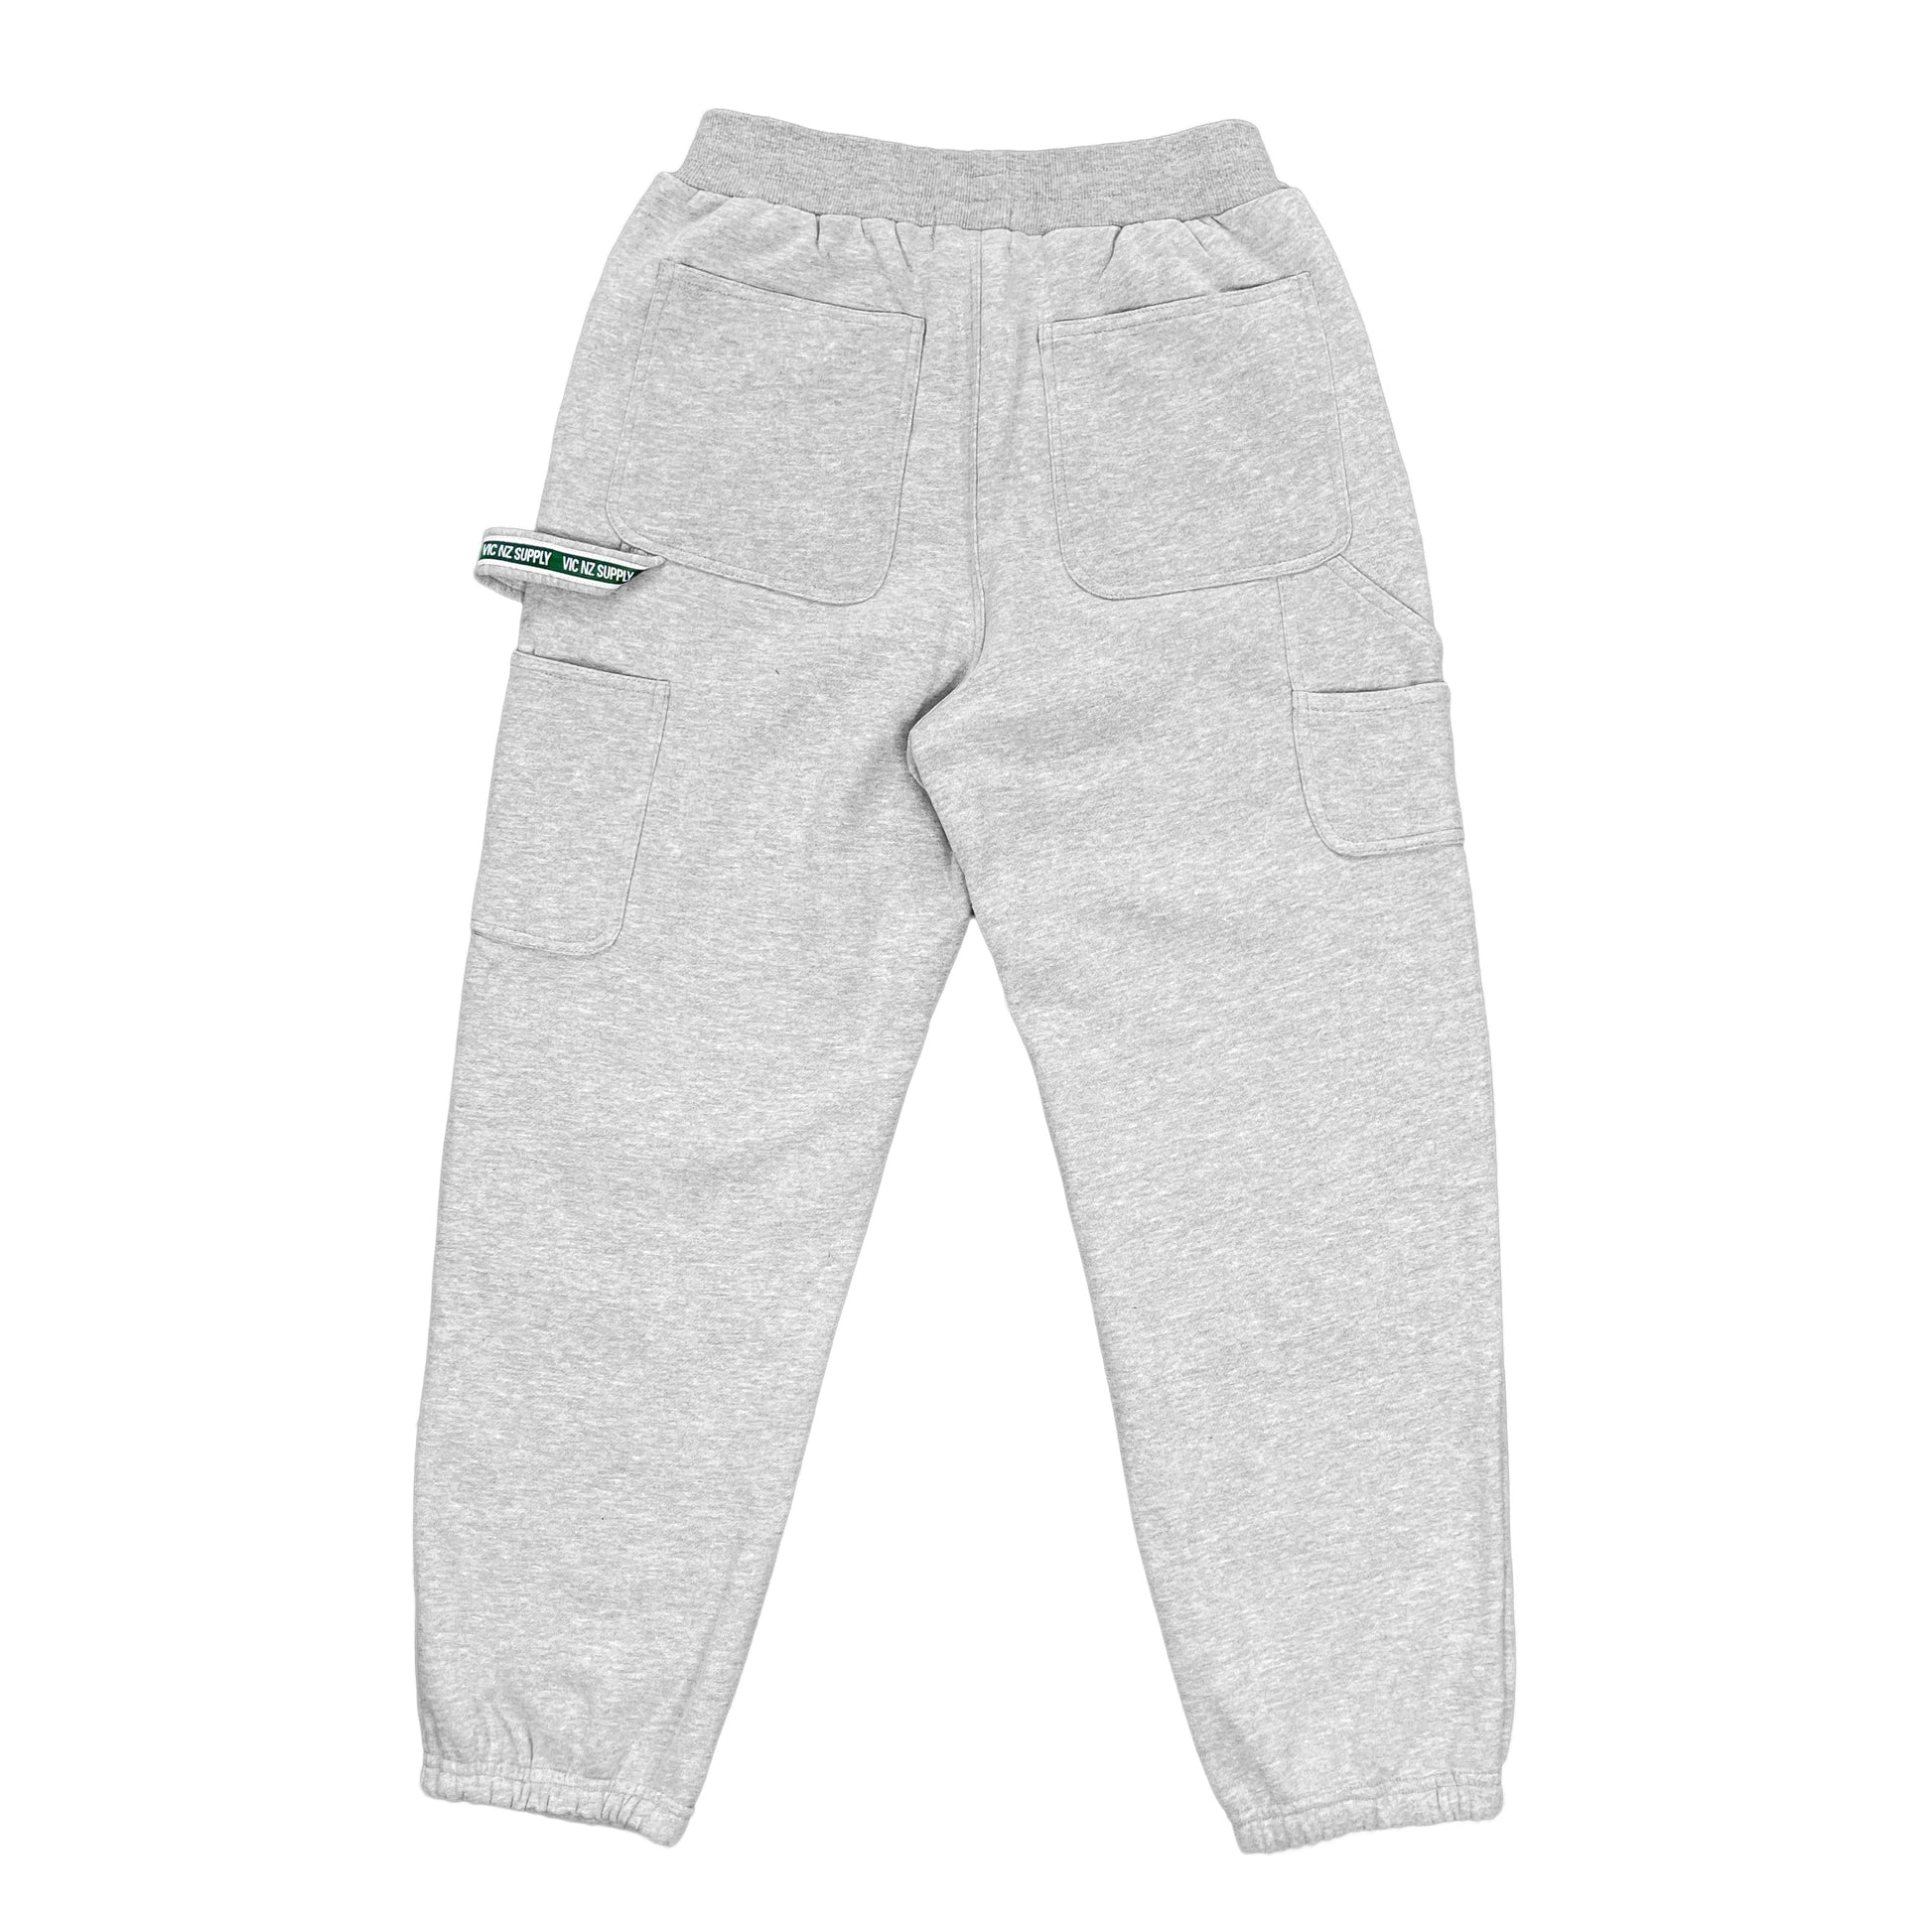 Experience the perfect blend of vintage workwear and comfort with our Carpenter Track Pants. Crafted from 100% cotton at a substantial 350 GSM weight, these heavyweight pants feature a front knee patch, elastic waistband with a drawstring, utility pockets, and a classic hammer loop. Elevate your style with durability and authenticity in every detail.